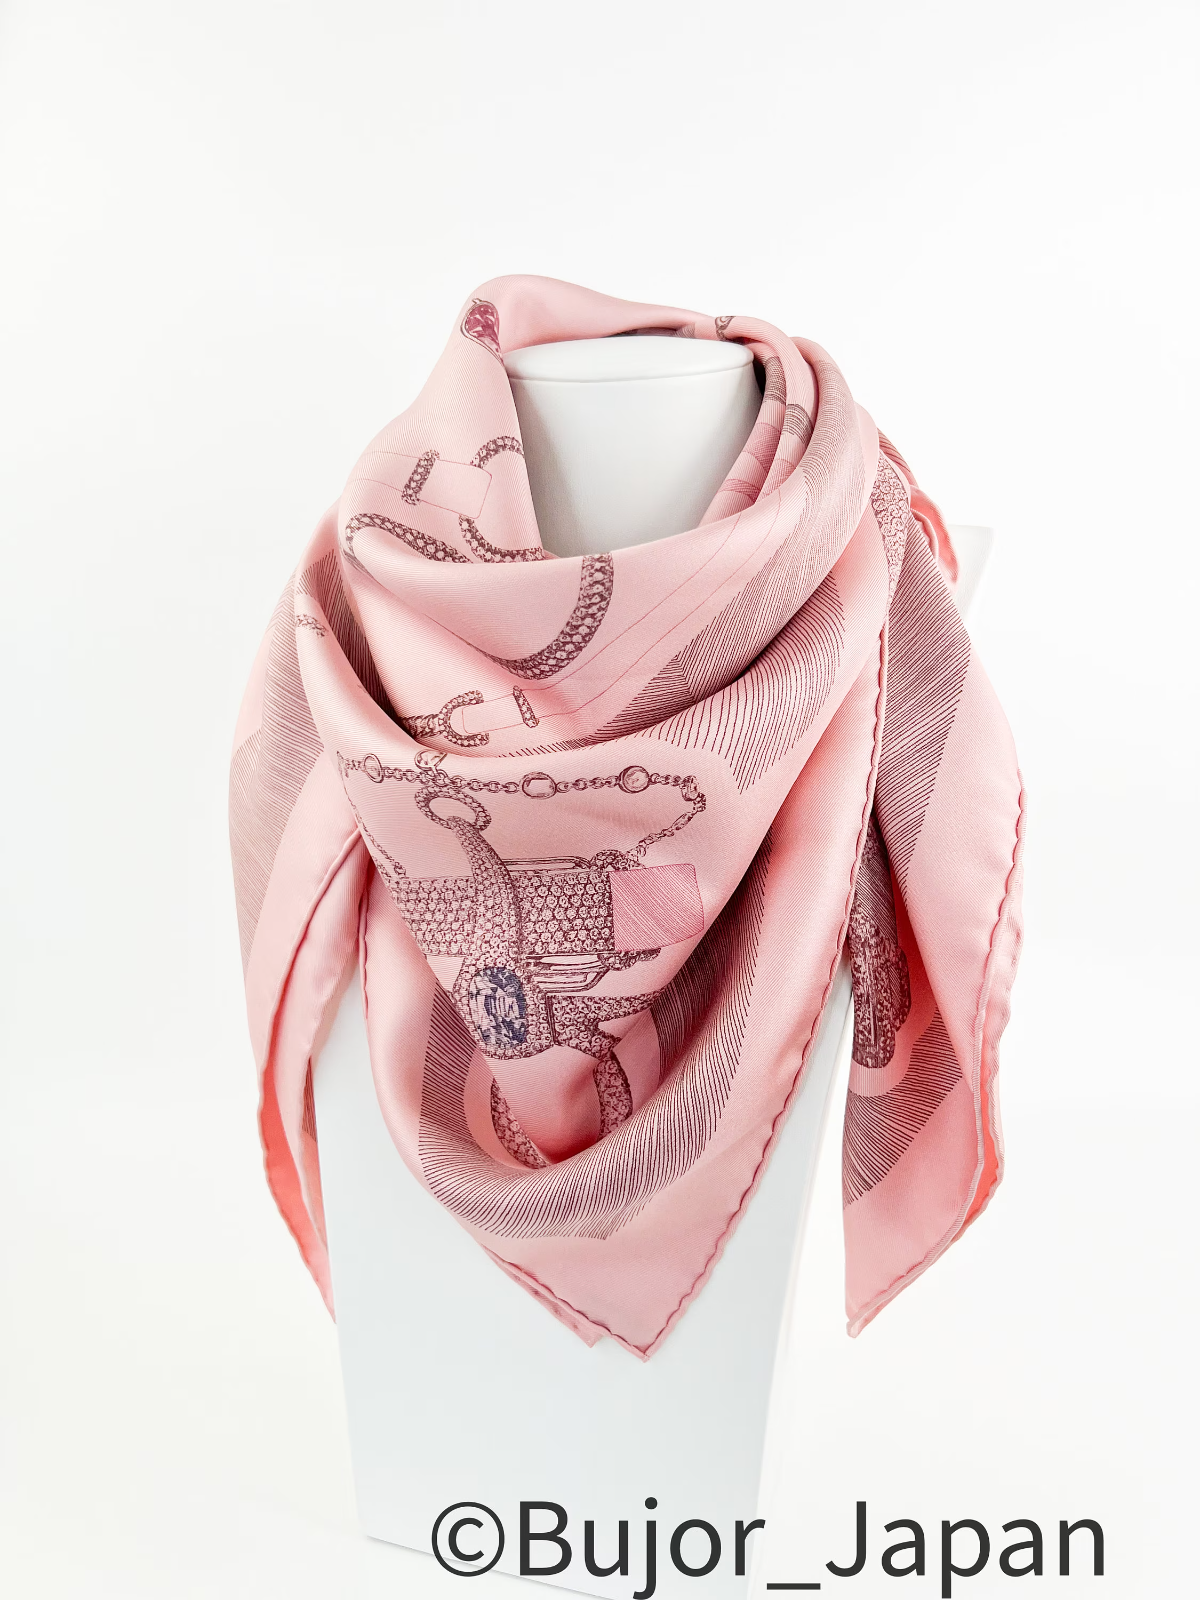 Herme scarf, Hermes Scarf "Etude pour une Parure de Gala" Vintage silk scarf, 90 cm Silk pink Carre jewelery 35" Gift for her, Head Scarf